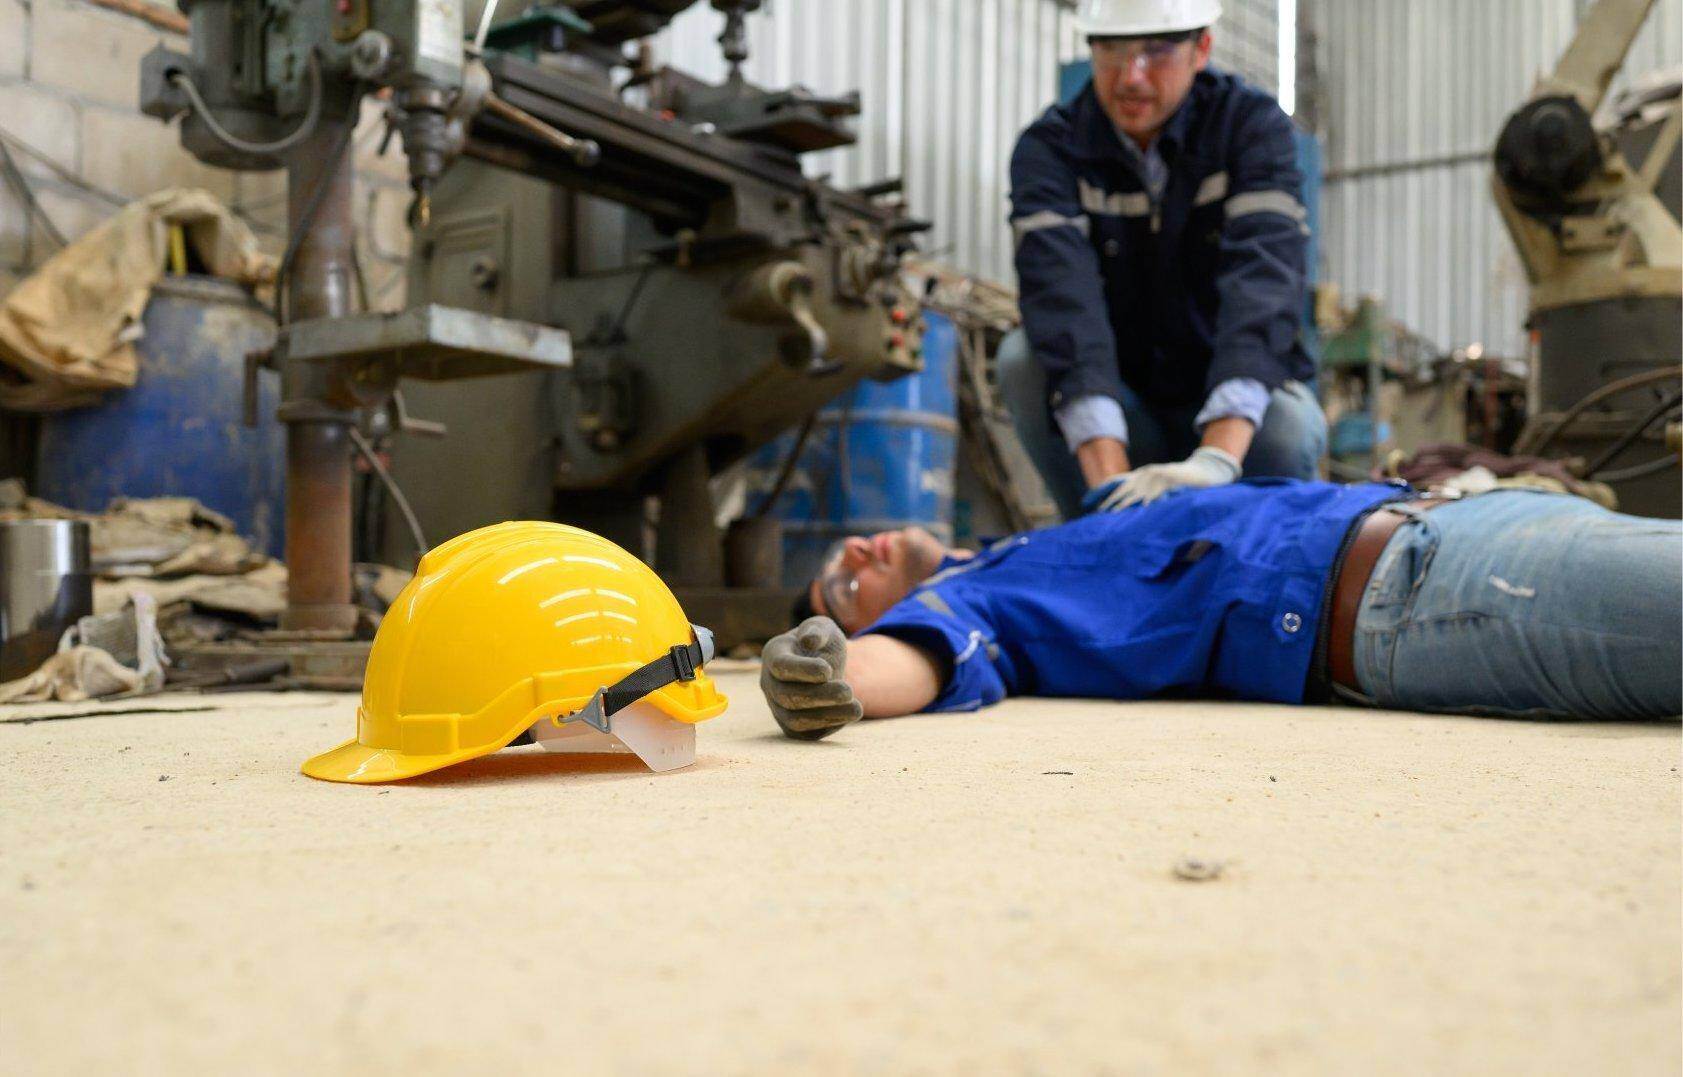 An unconscious man who has been injured on the job who will file for workers compensation in Lawrenceville, Georgia